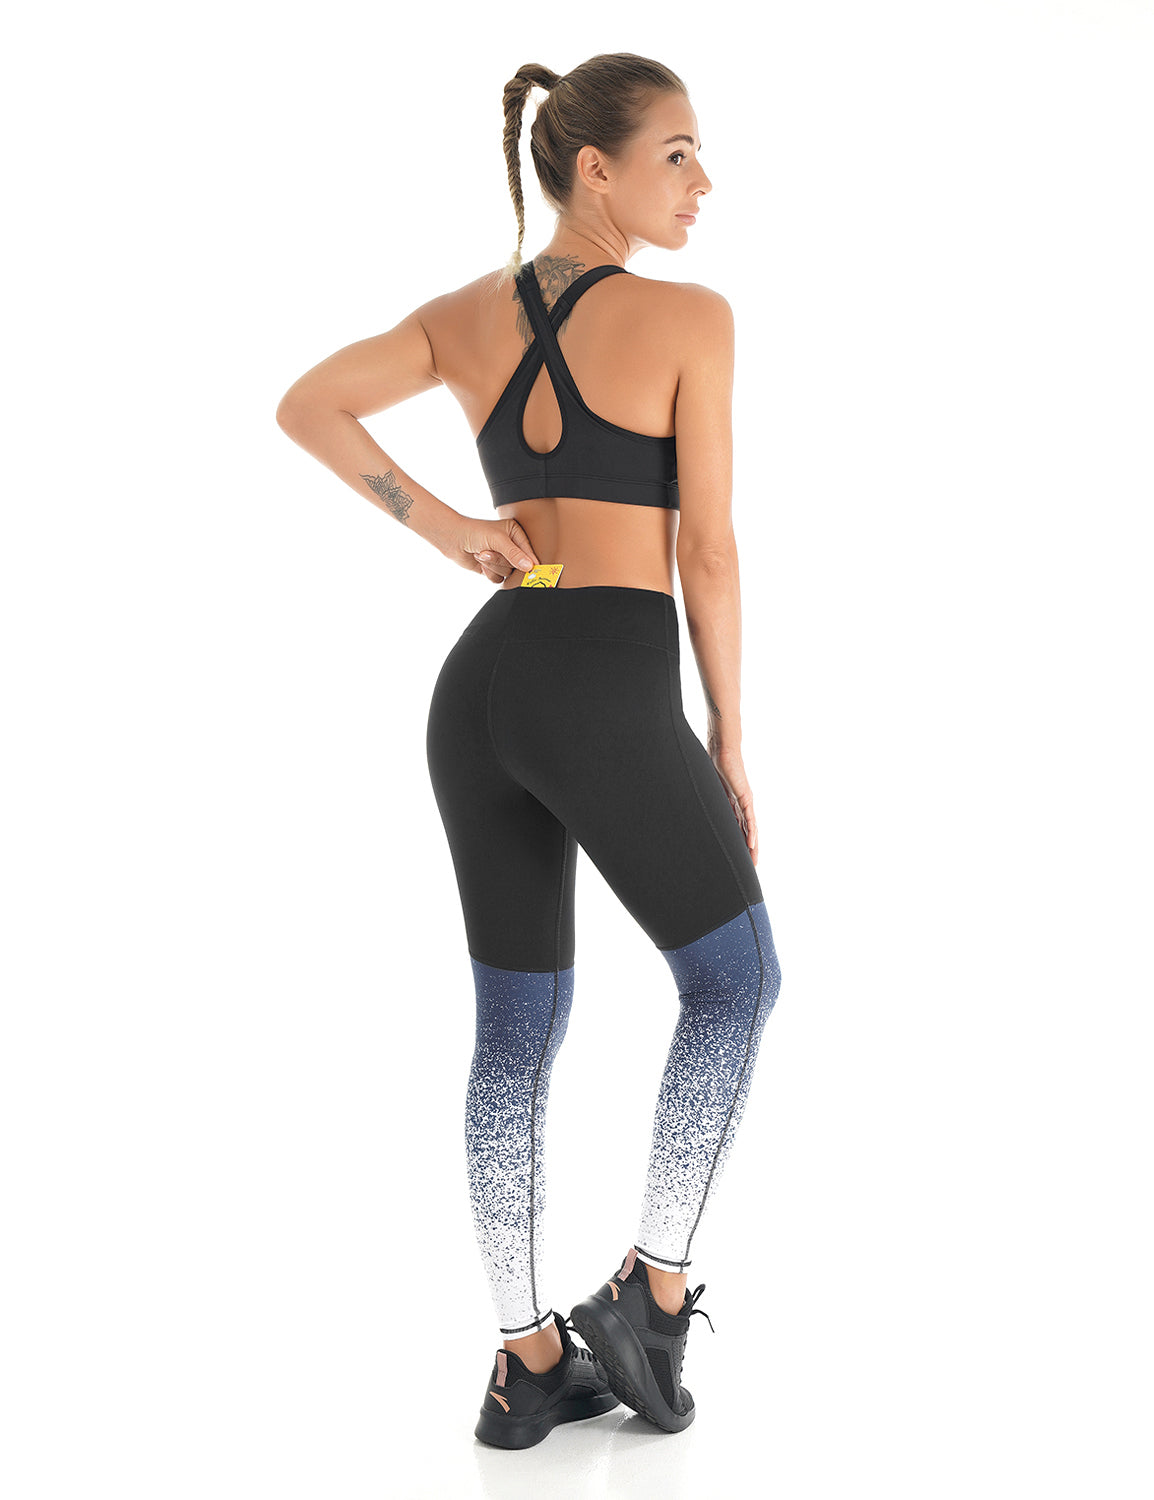 Blooming Jelly_Splashed High Waisted Training Leggings_Black_256088_21_Women Athletic Comfy Outfits_Bottoms_Leggings